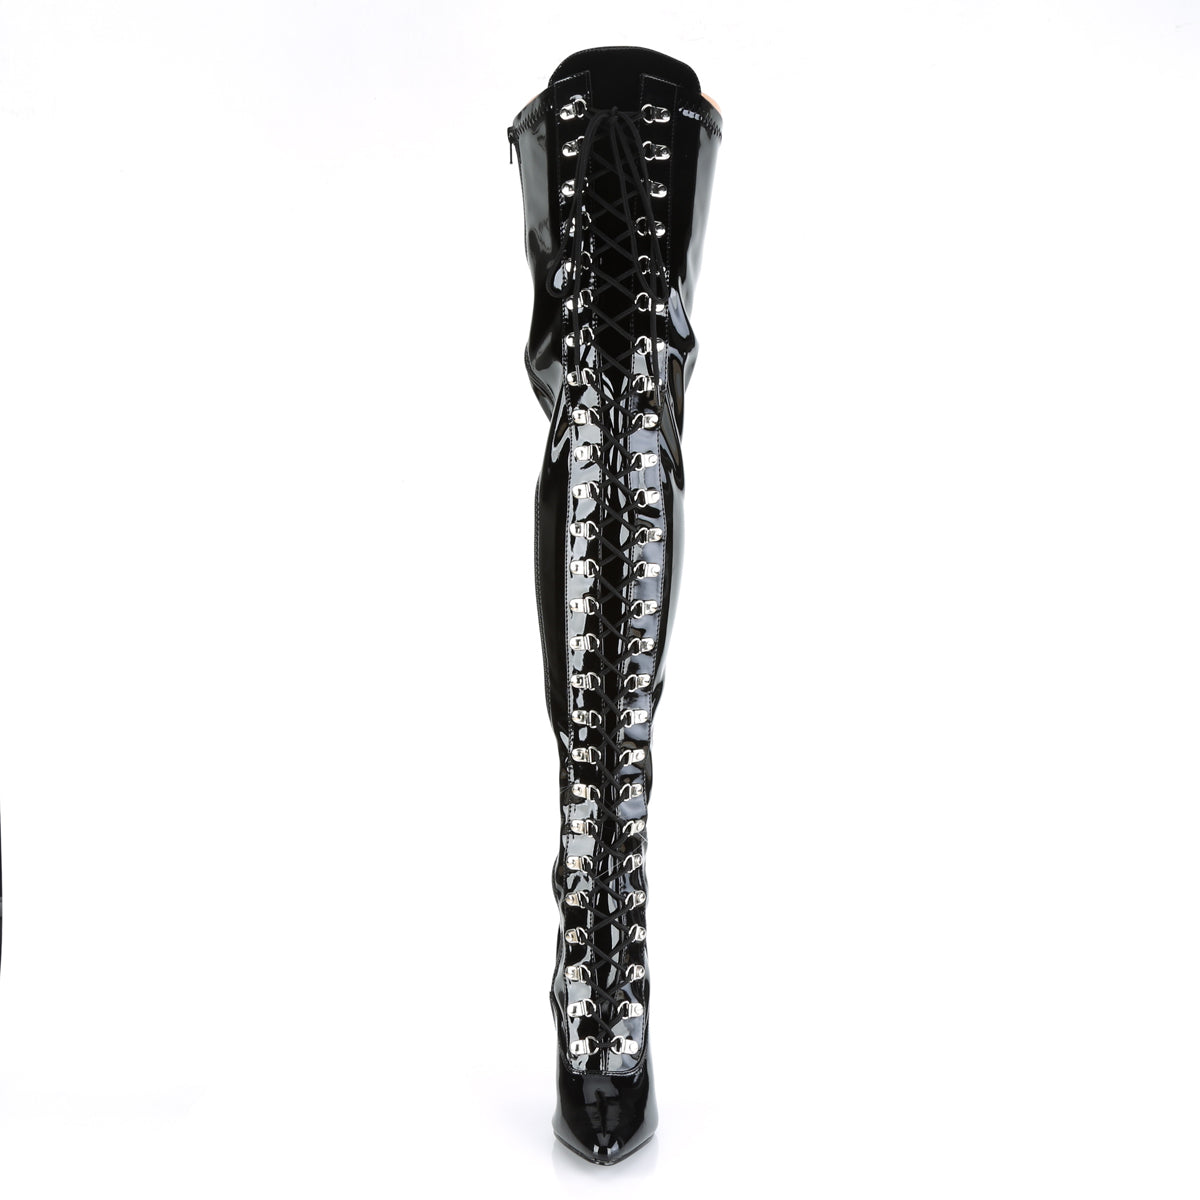 SEDUCE-3024 / B 5 "PLEASER FAST DELIVERY 24-48h 